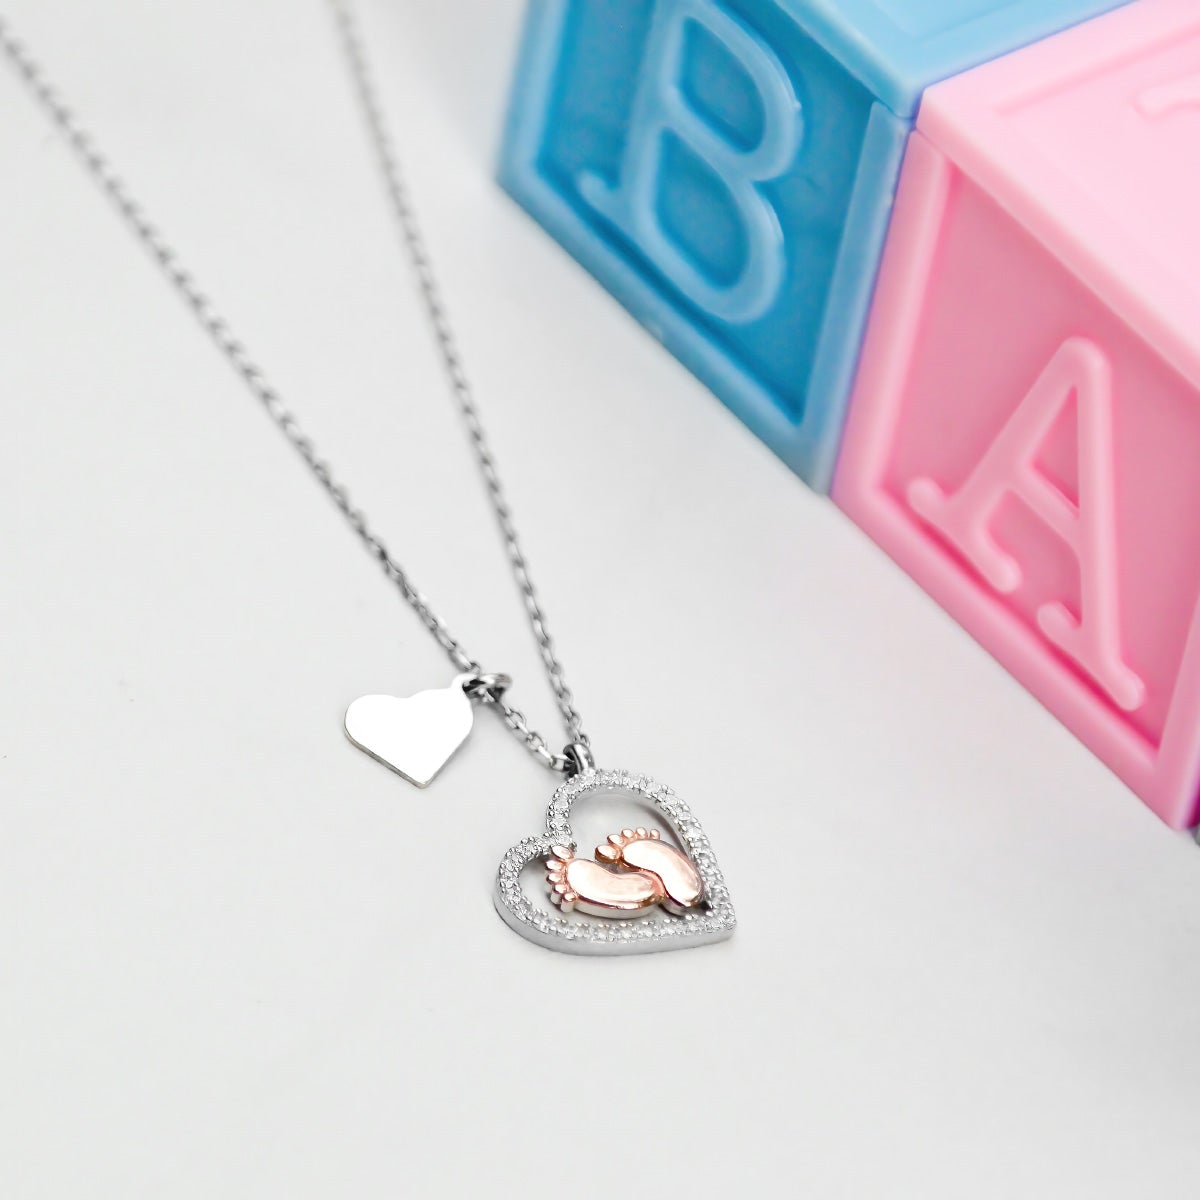 To My Other Mommy - Baby Feet Heart Pendant Necklace Gift Set